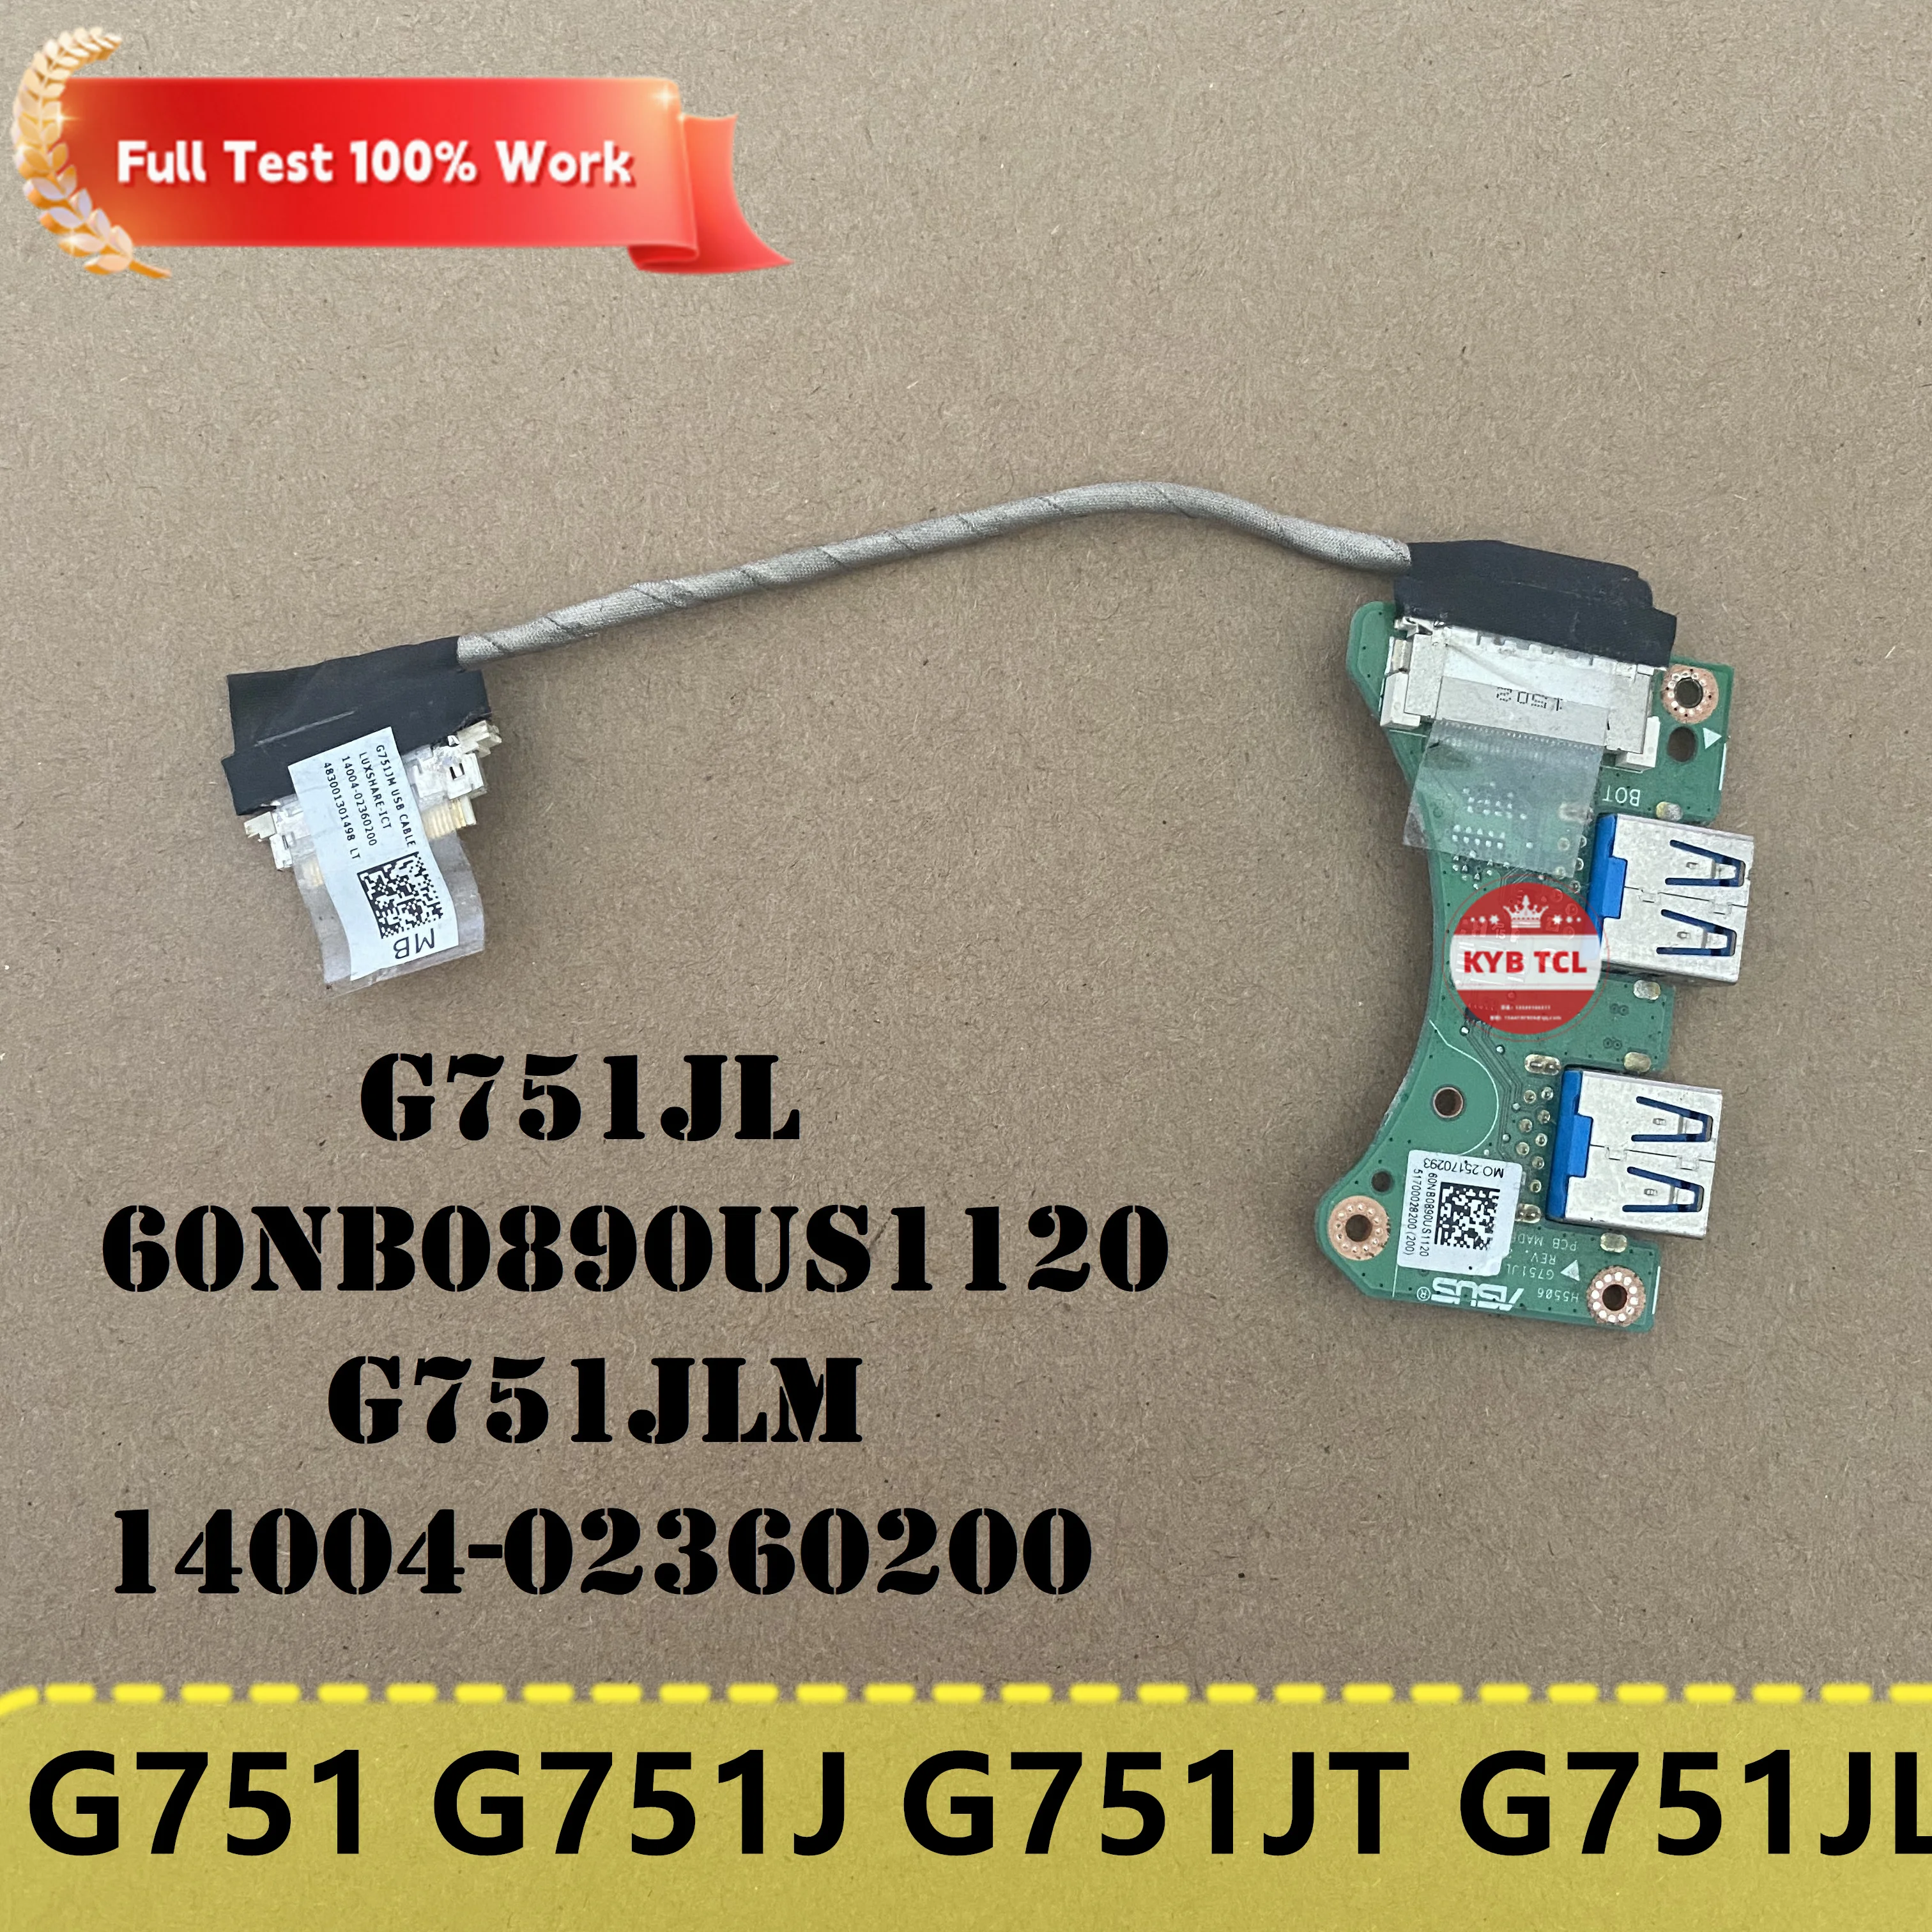 

Genuine For ASUS ROG G751 G751J G751JT G751JL G751JY G751JM Laptop USB Port Board w/Cable Notebook 60NB0890US1120 14004-02360200